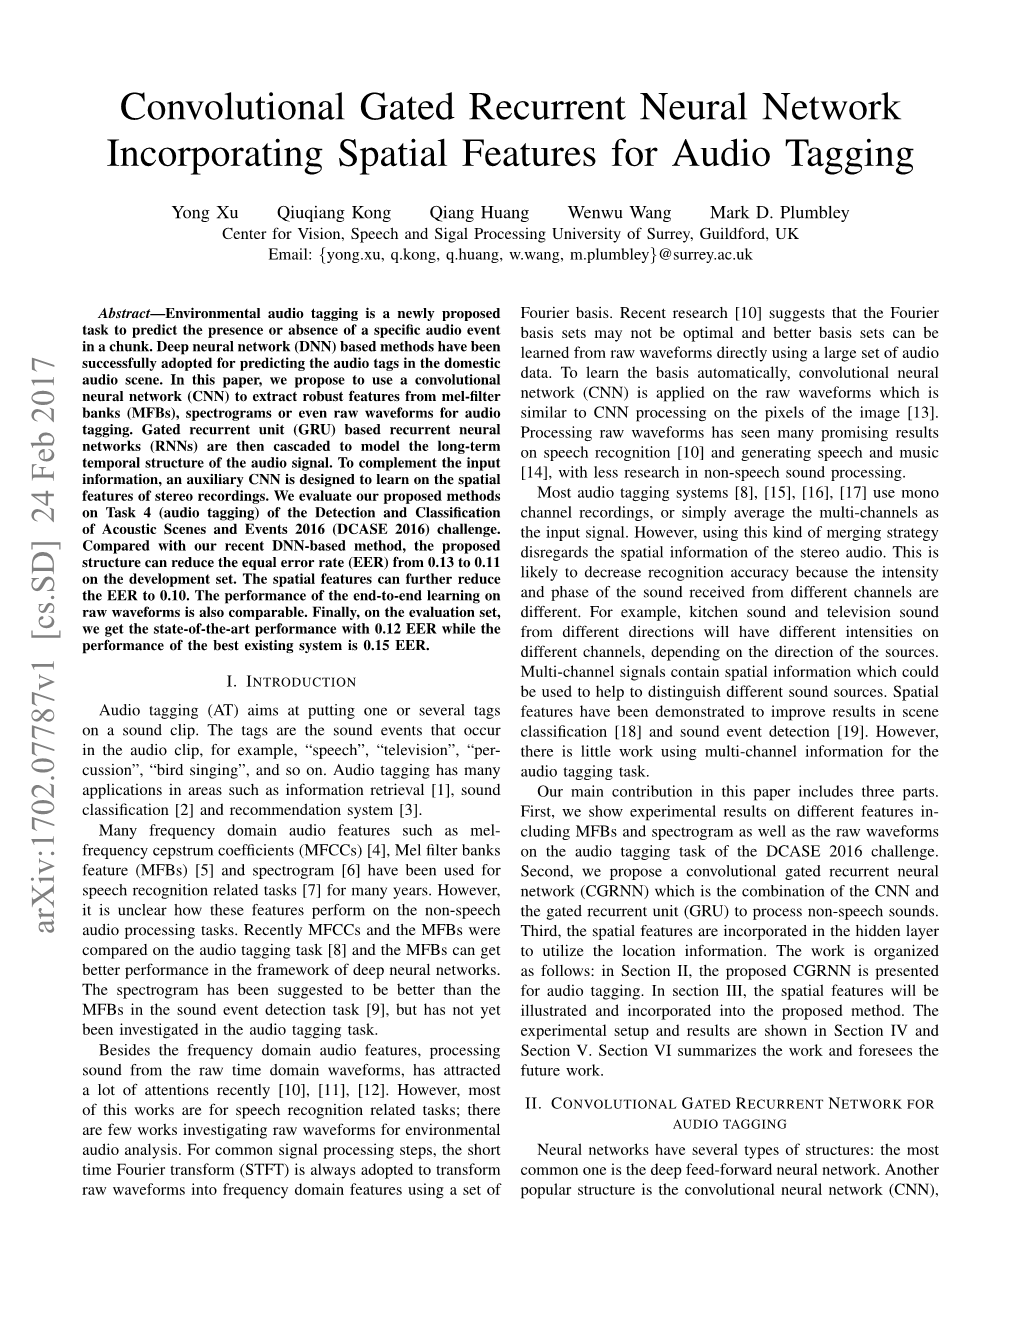 Convolutional Gated Recurrent Neural Network Incorporating Spatial Features for Audio Tagging